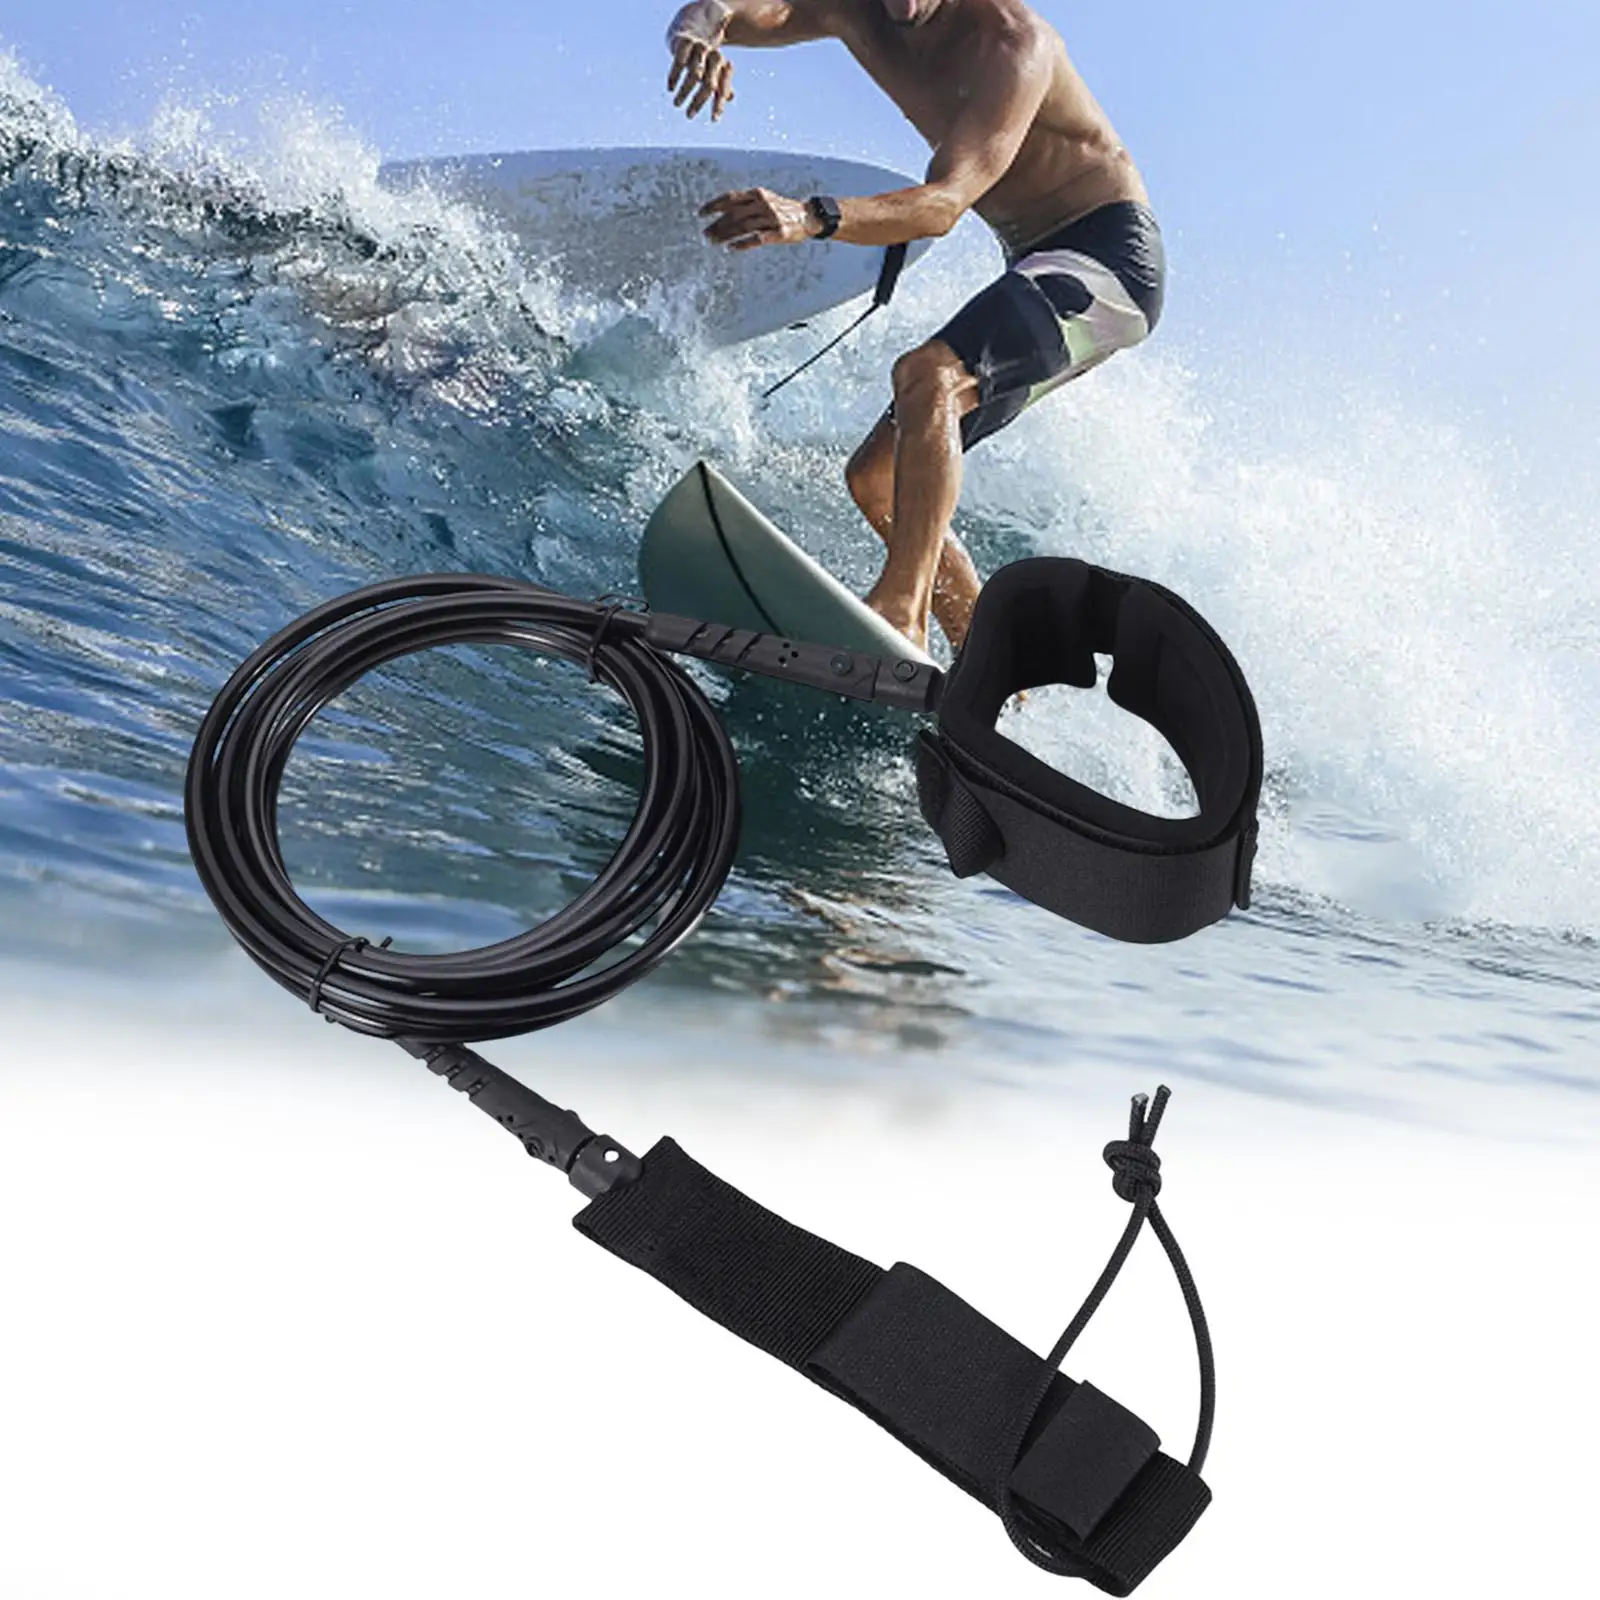 Surfboard Leash Straight Stand up Paddle Board Leash Portable Paddle Strap for Long Boards Short Boards Boat Canoe Surfboards